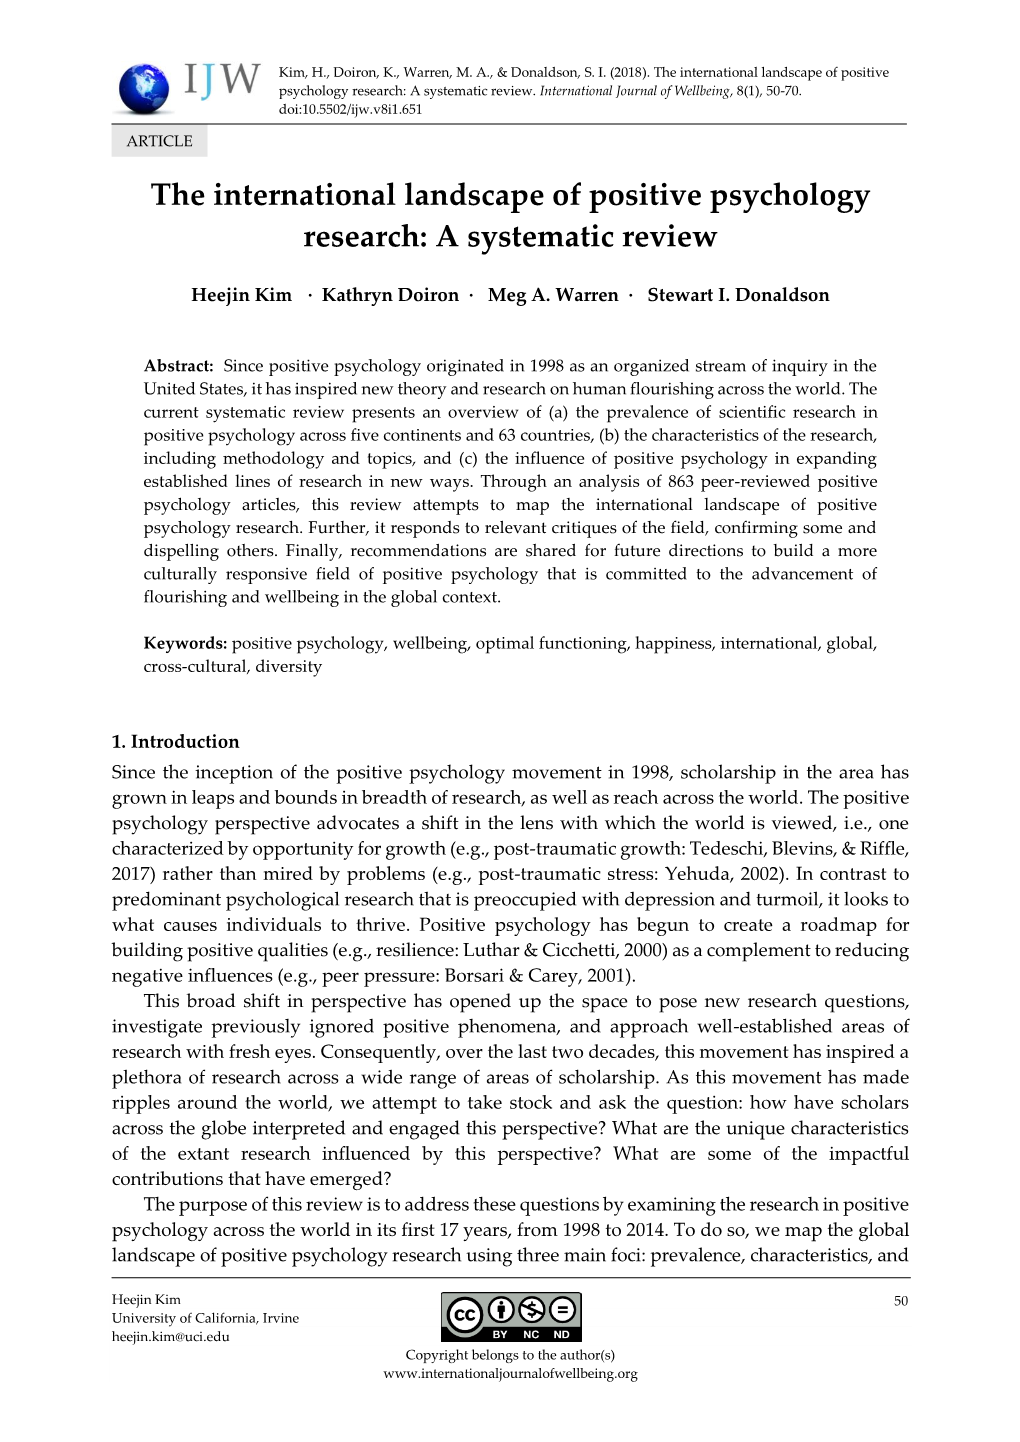 The International Landscape of Positive Psychology Research: a Systematic Review